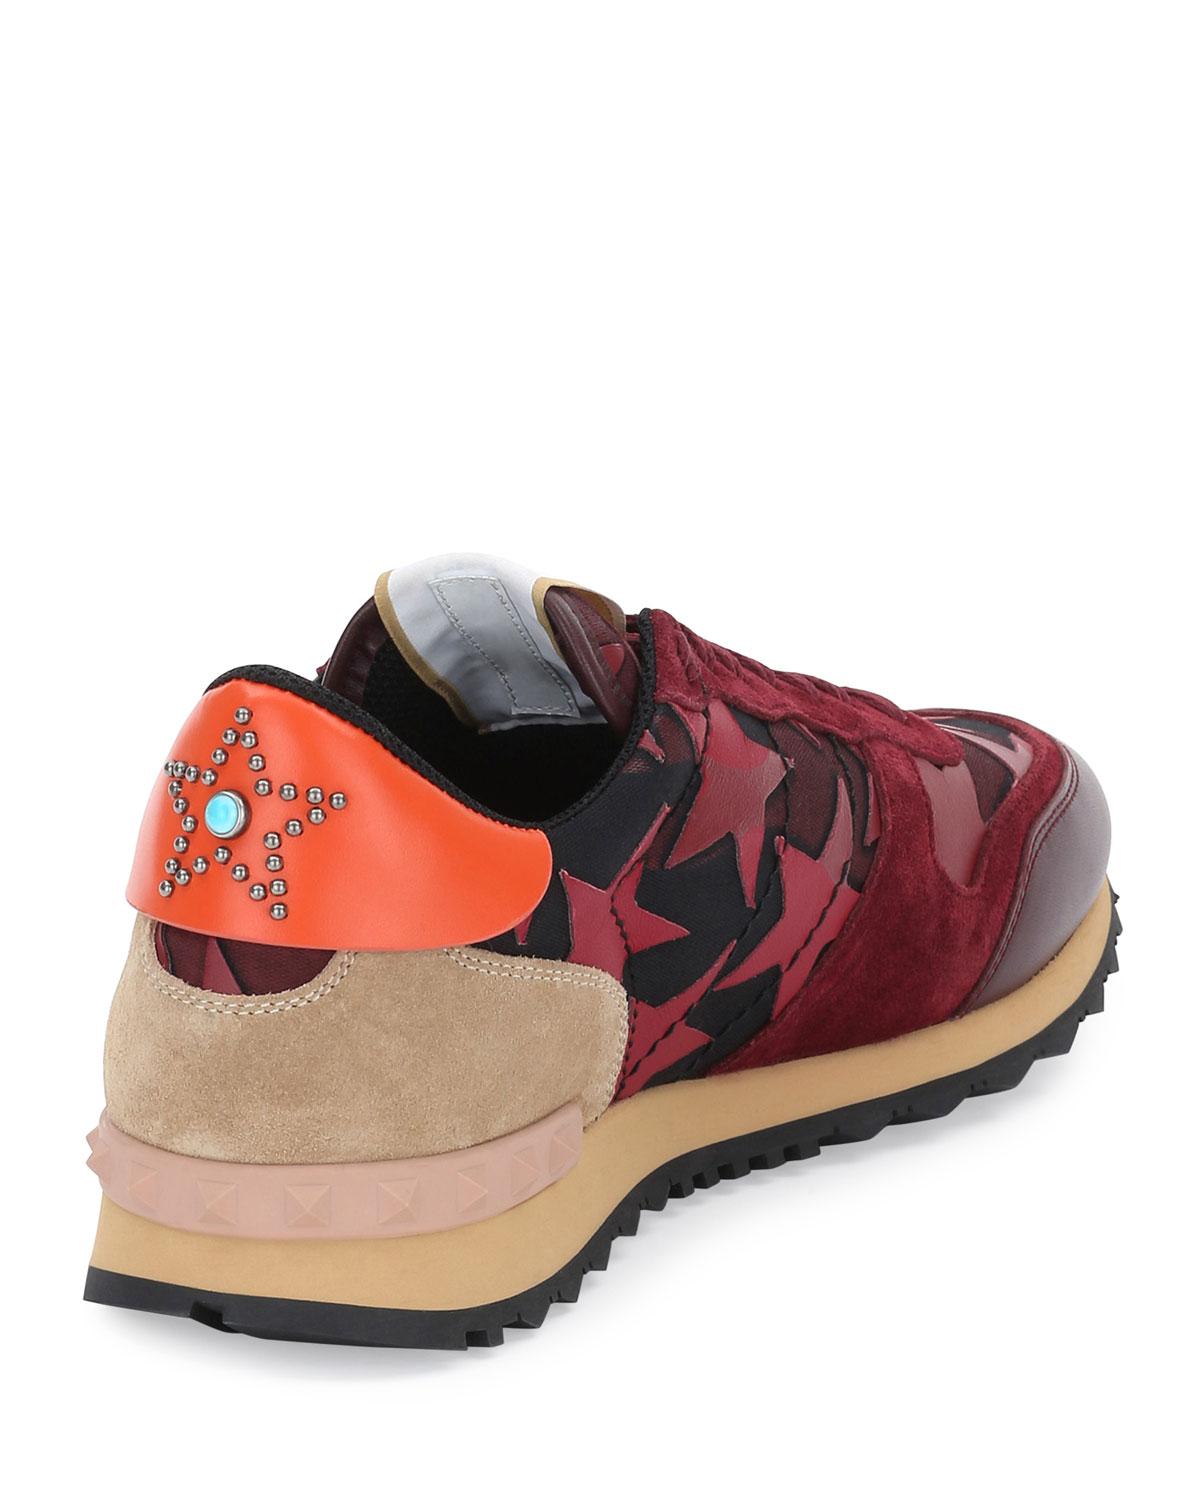 valentino rockrunner red camo low cost 